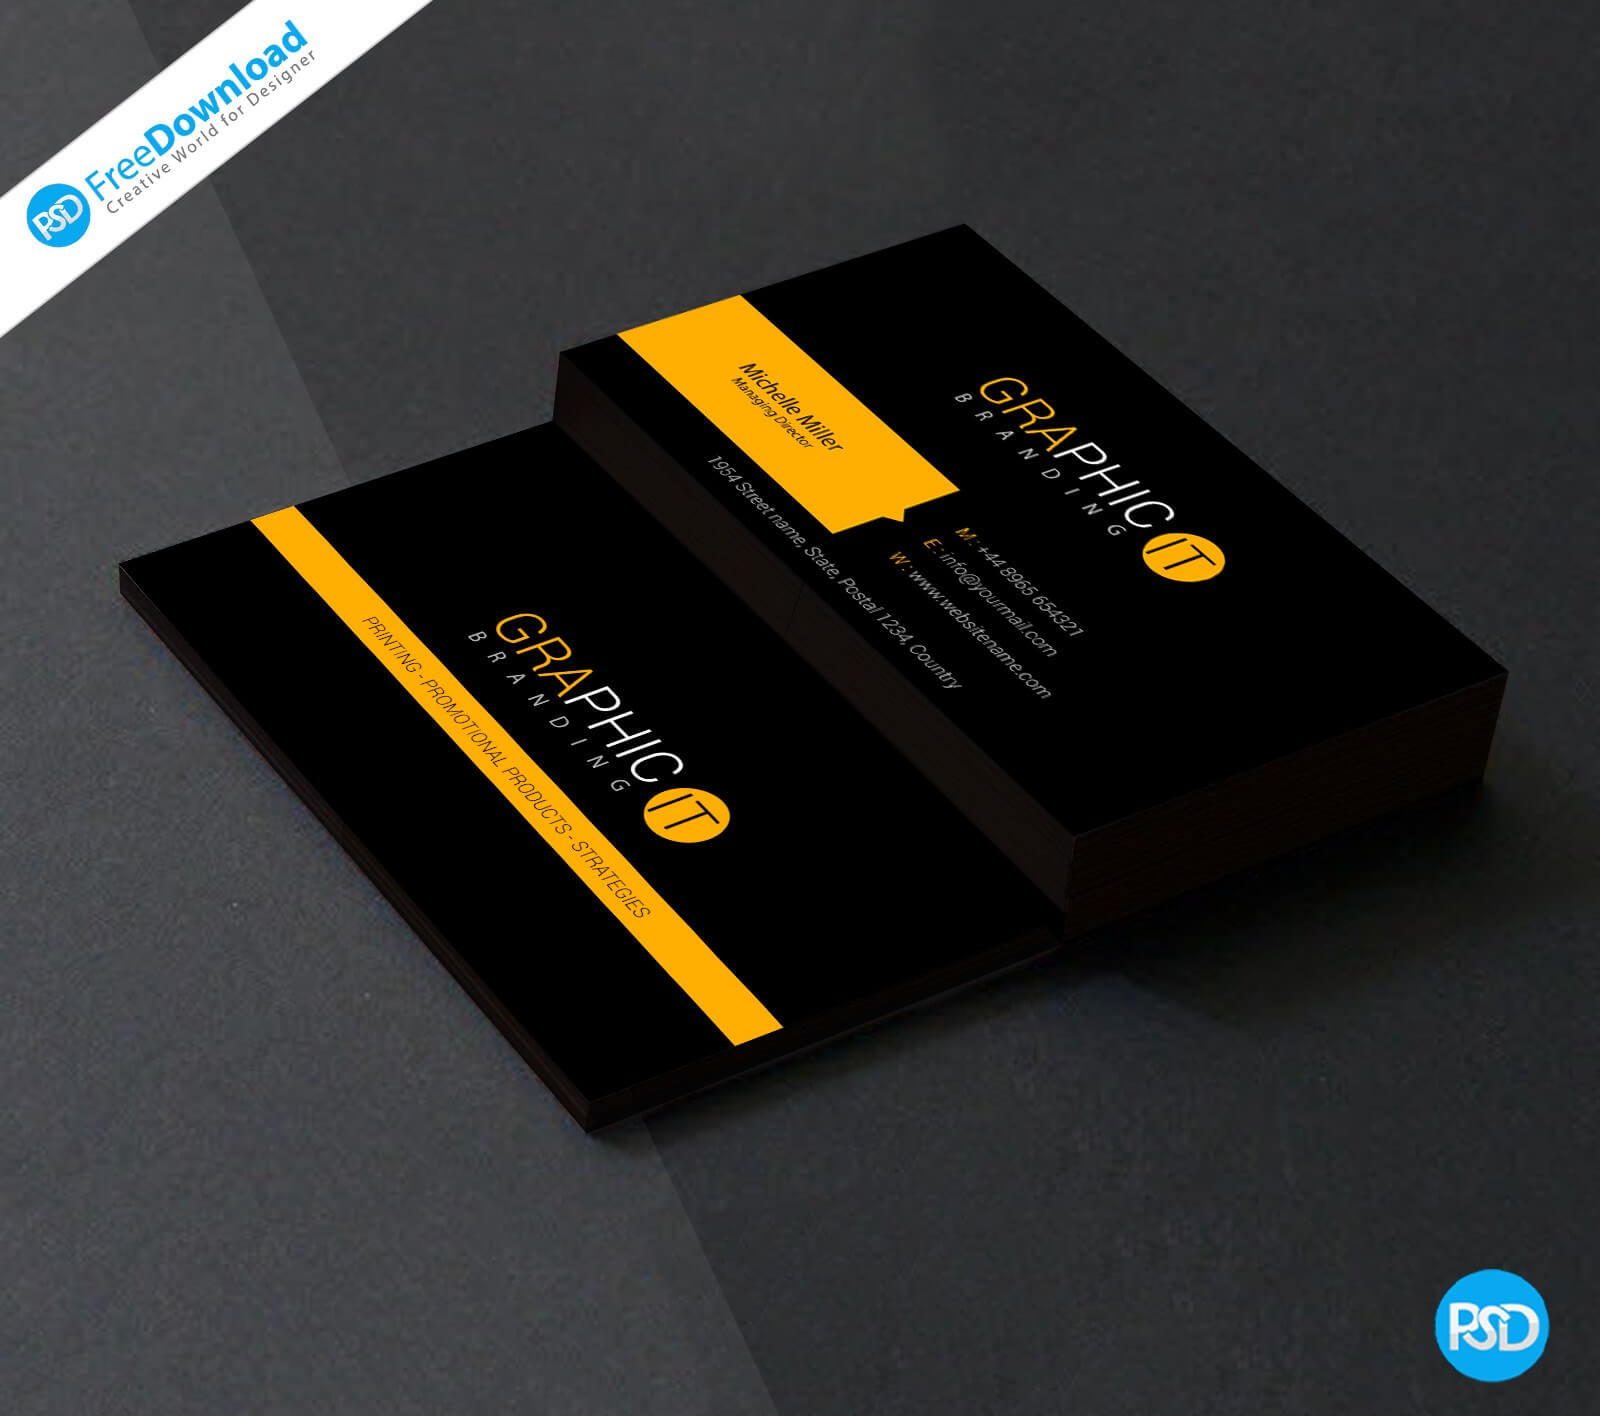 010 Blank Business Card Template Photoshop Free Download Pertaining To Photoshop Name Card Template